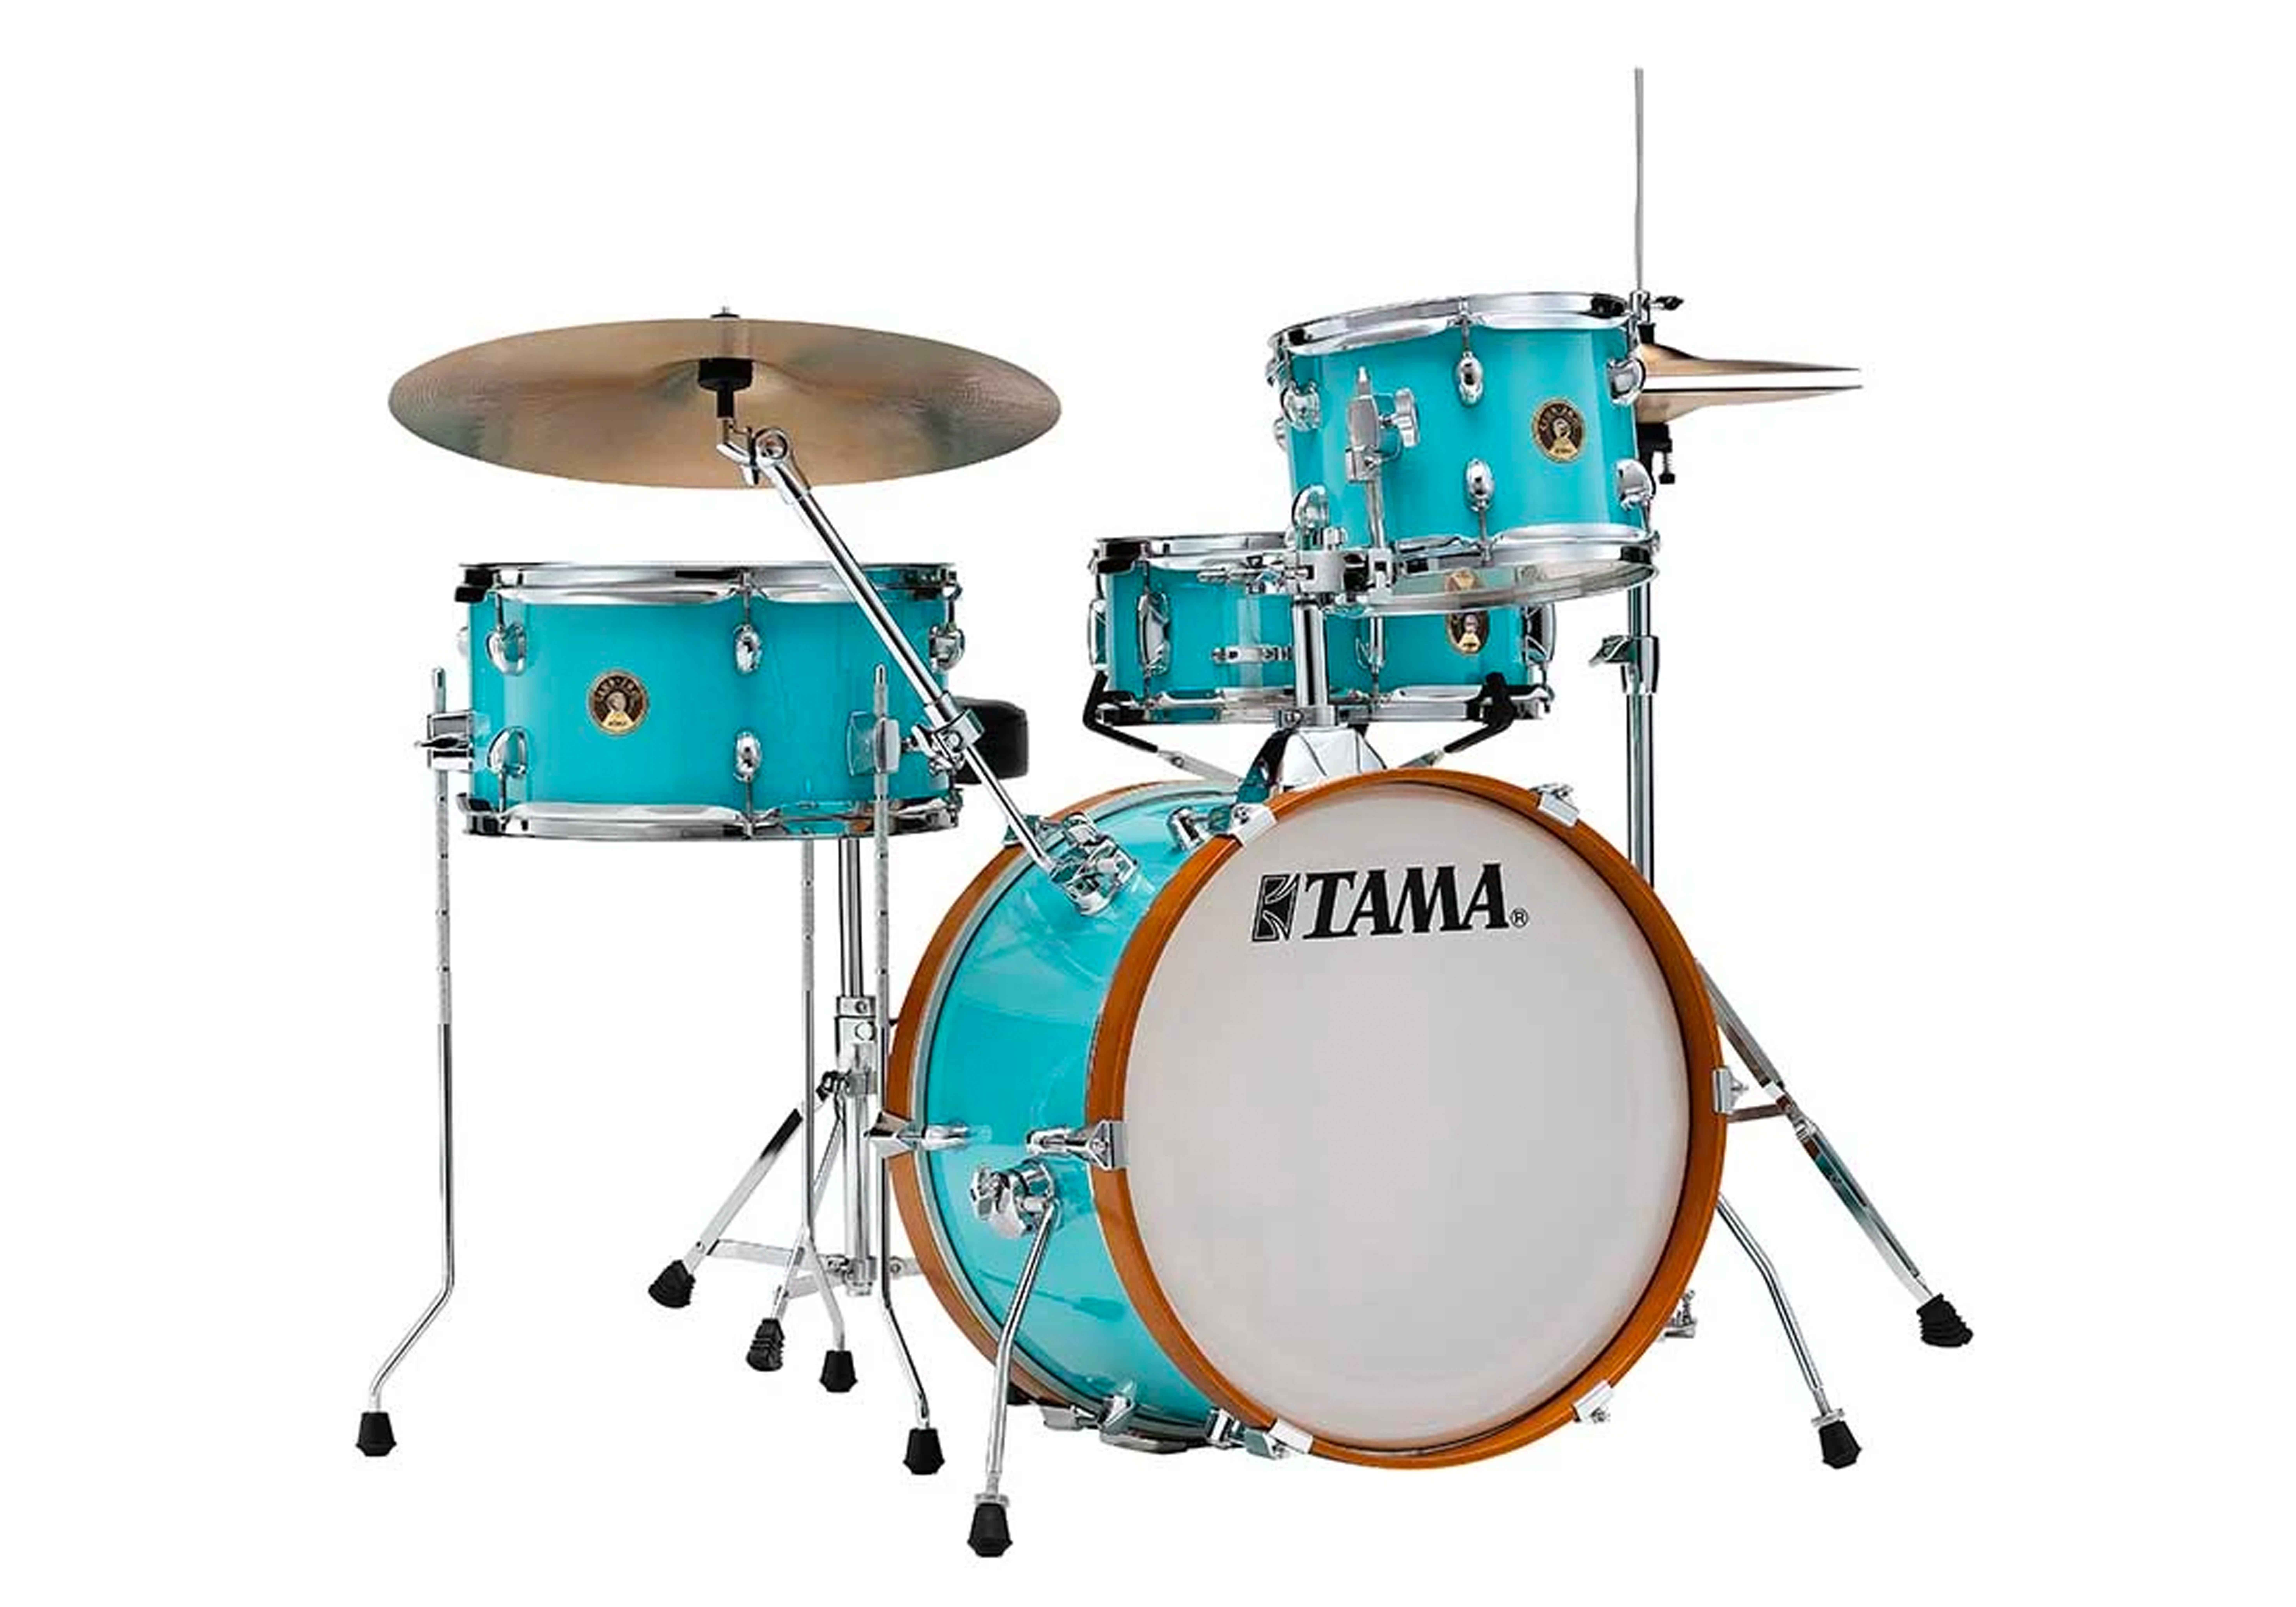 Buying Your First Drum Kit
